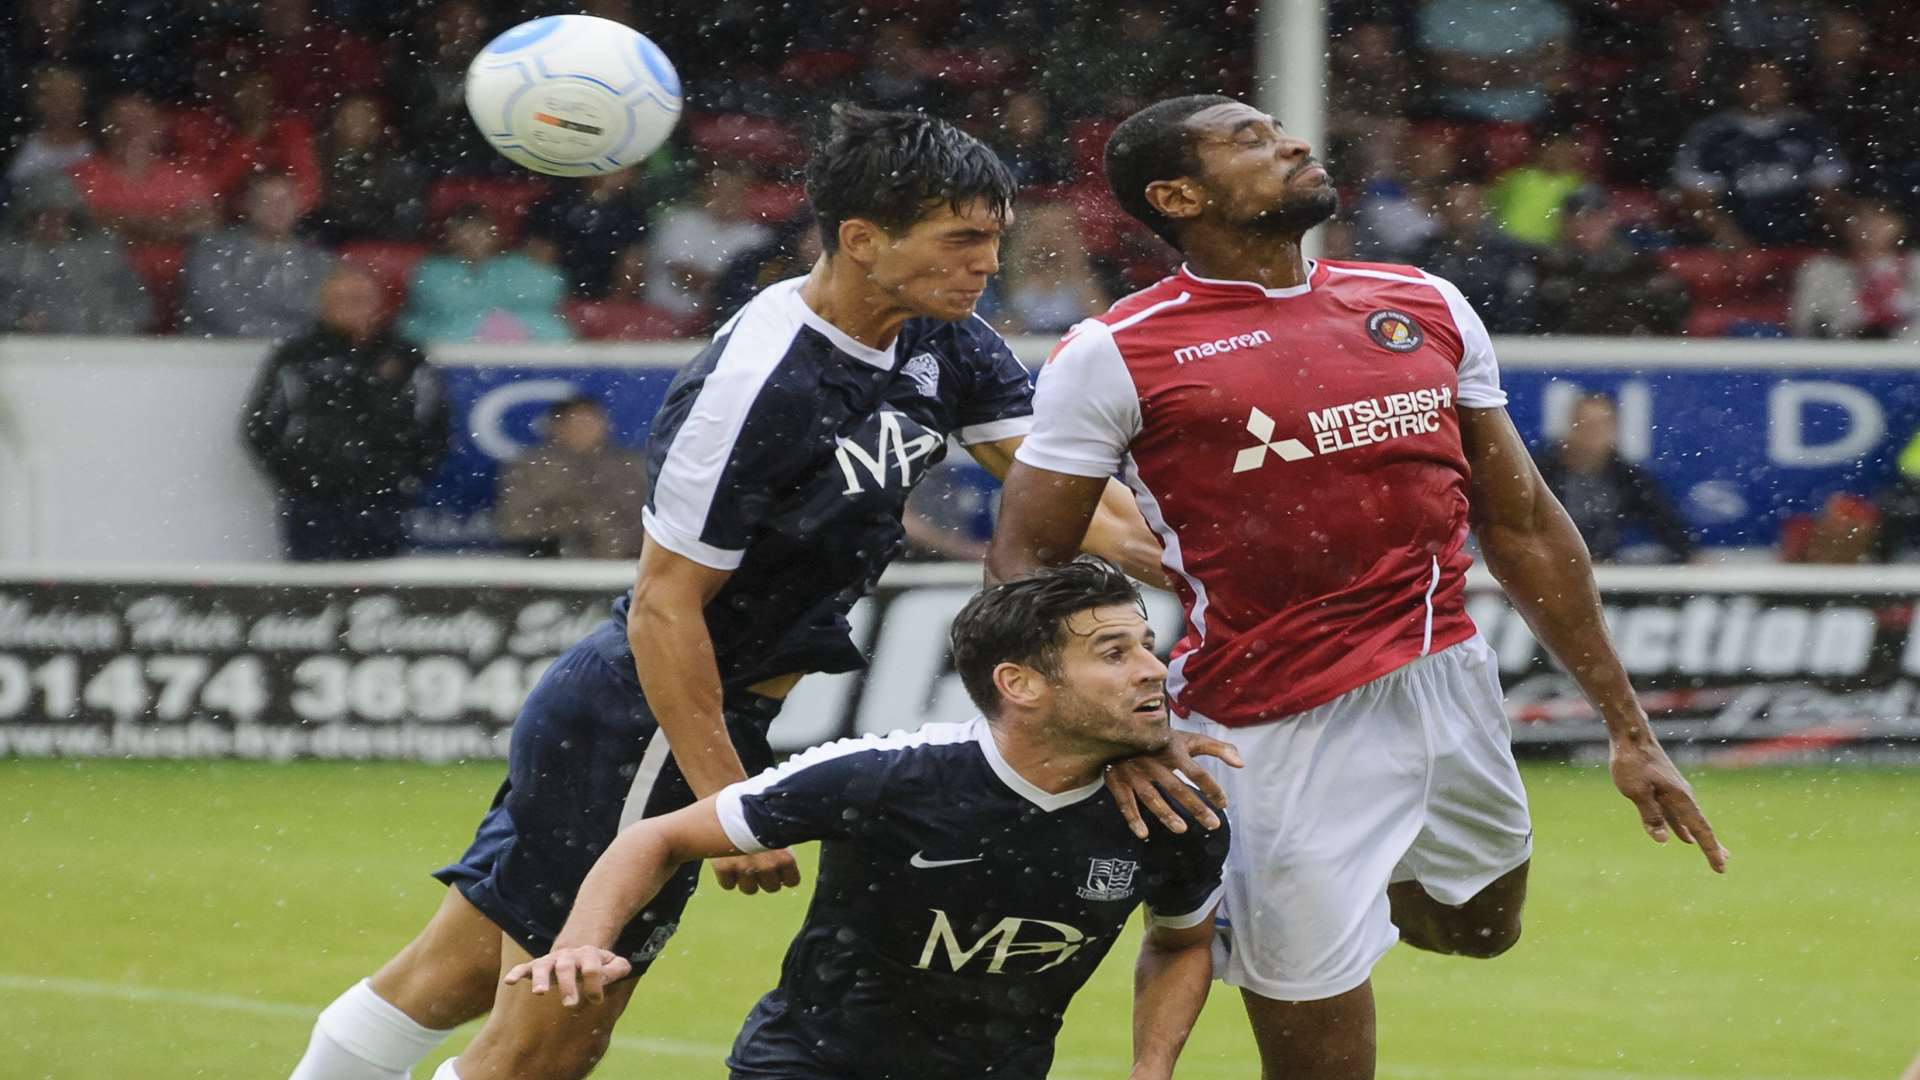 Danny Mills up for a header as the rain falls Picture: Andy Payton